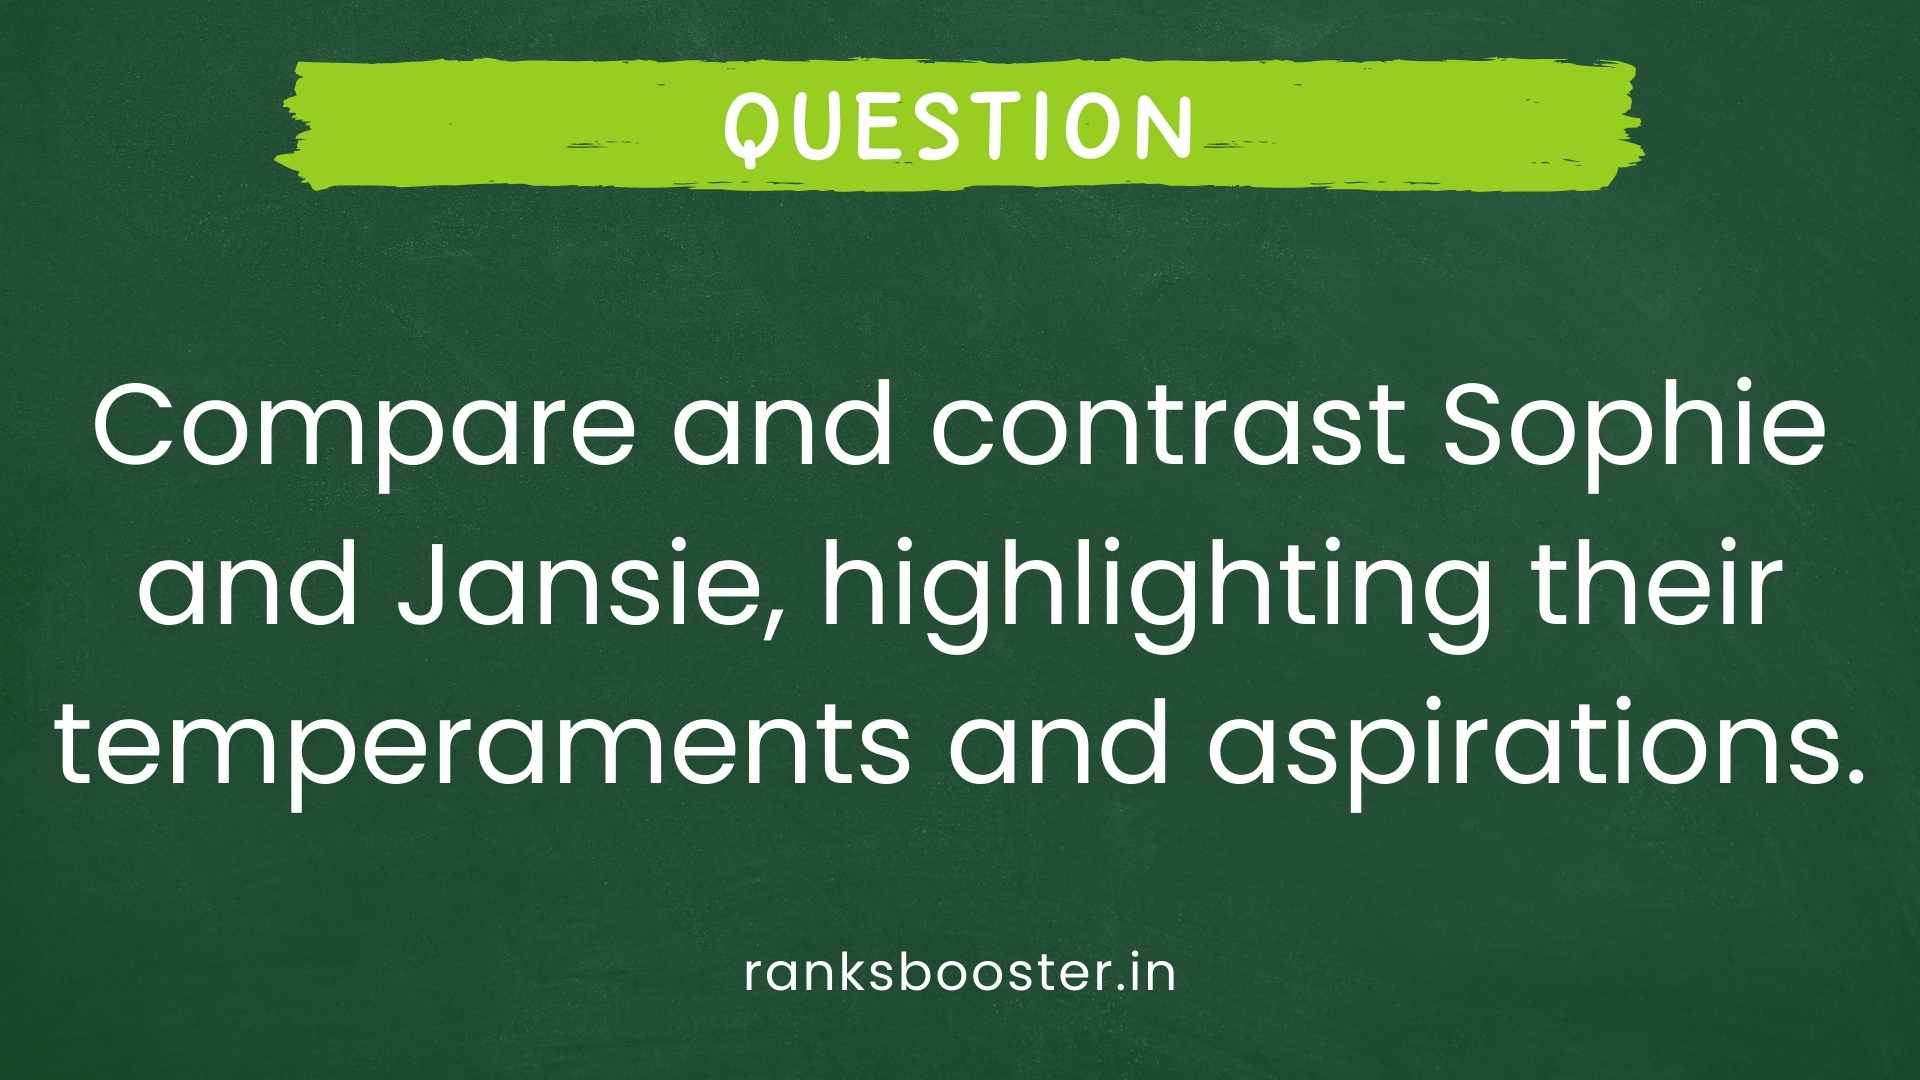 Question: Compare and contrast Sophie and Jansie, highlighting their temperaments and aspirations. [CBSE Delhi 2012]